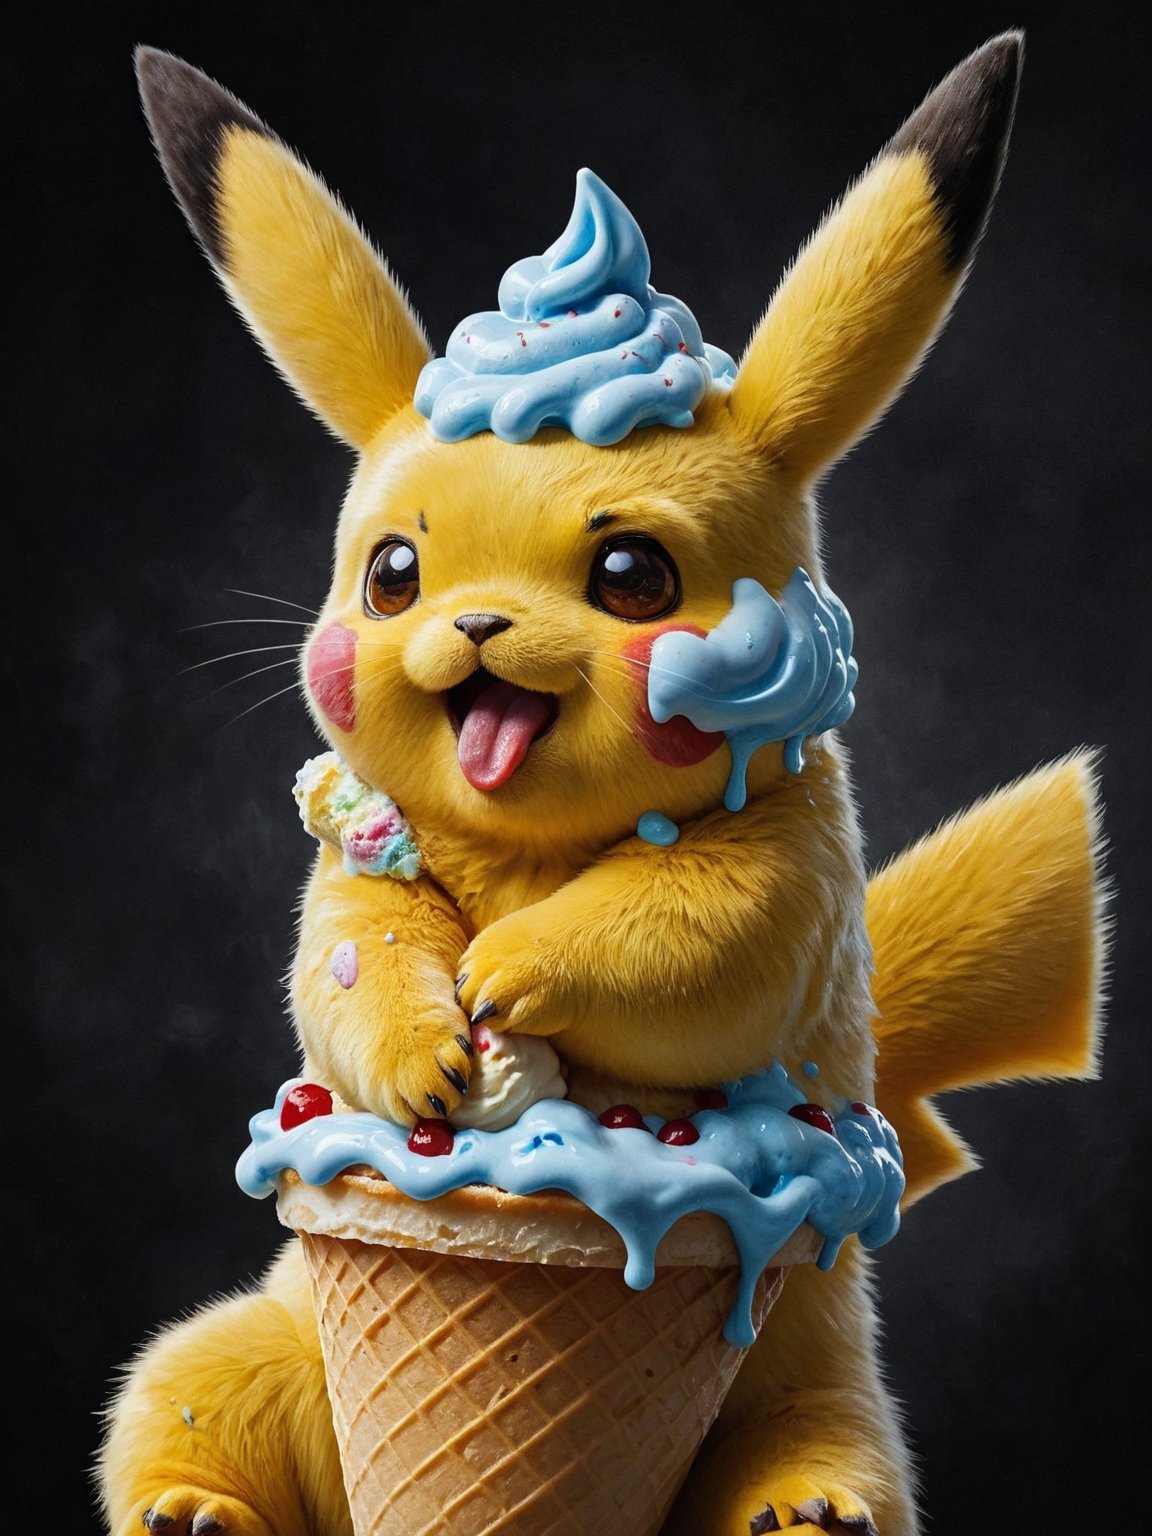 dark oil painting, a side view portrait of a 1Pikachu morphed into a ice-cream cone, with a ice-cream on his head, with passion, looking serene,  high detail, Rembrandt style, 17th century artwork